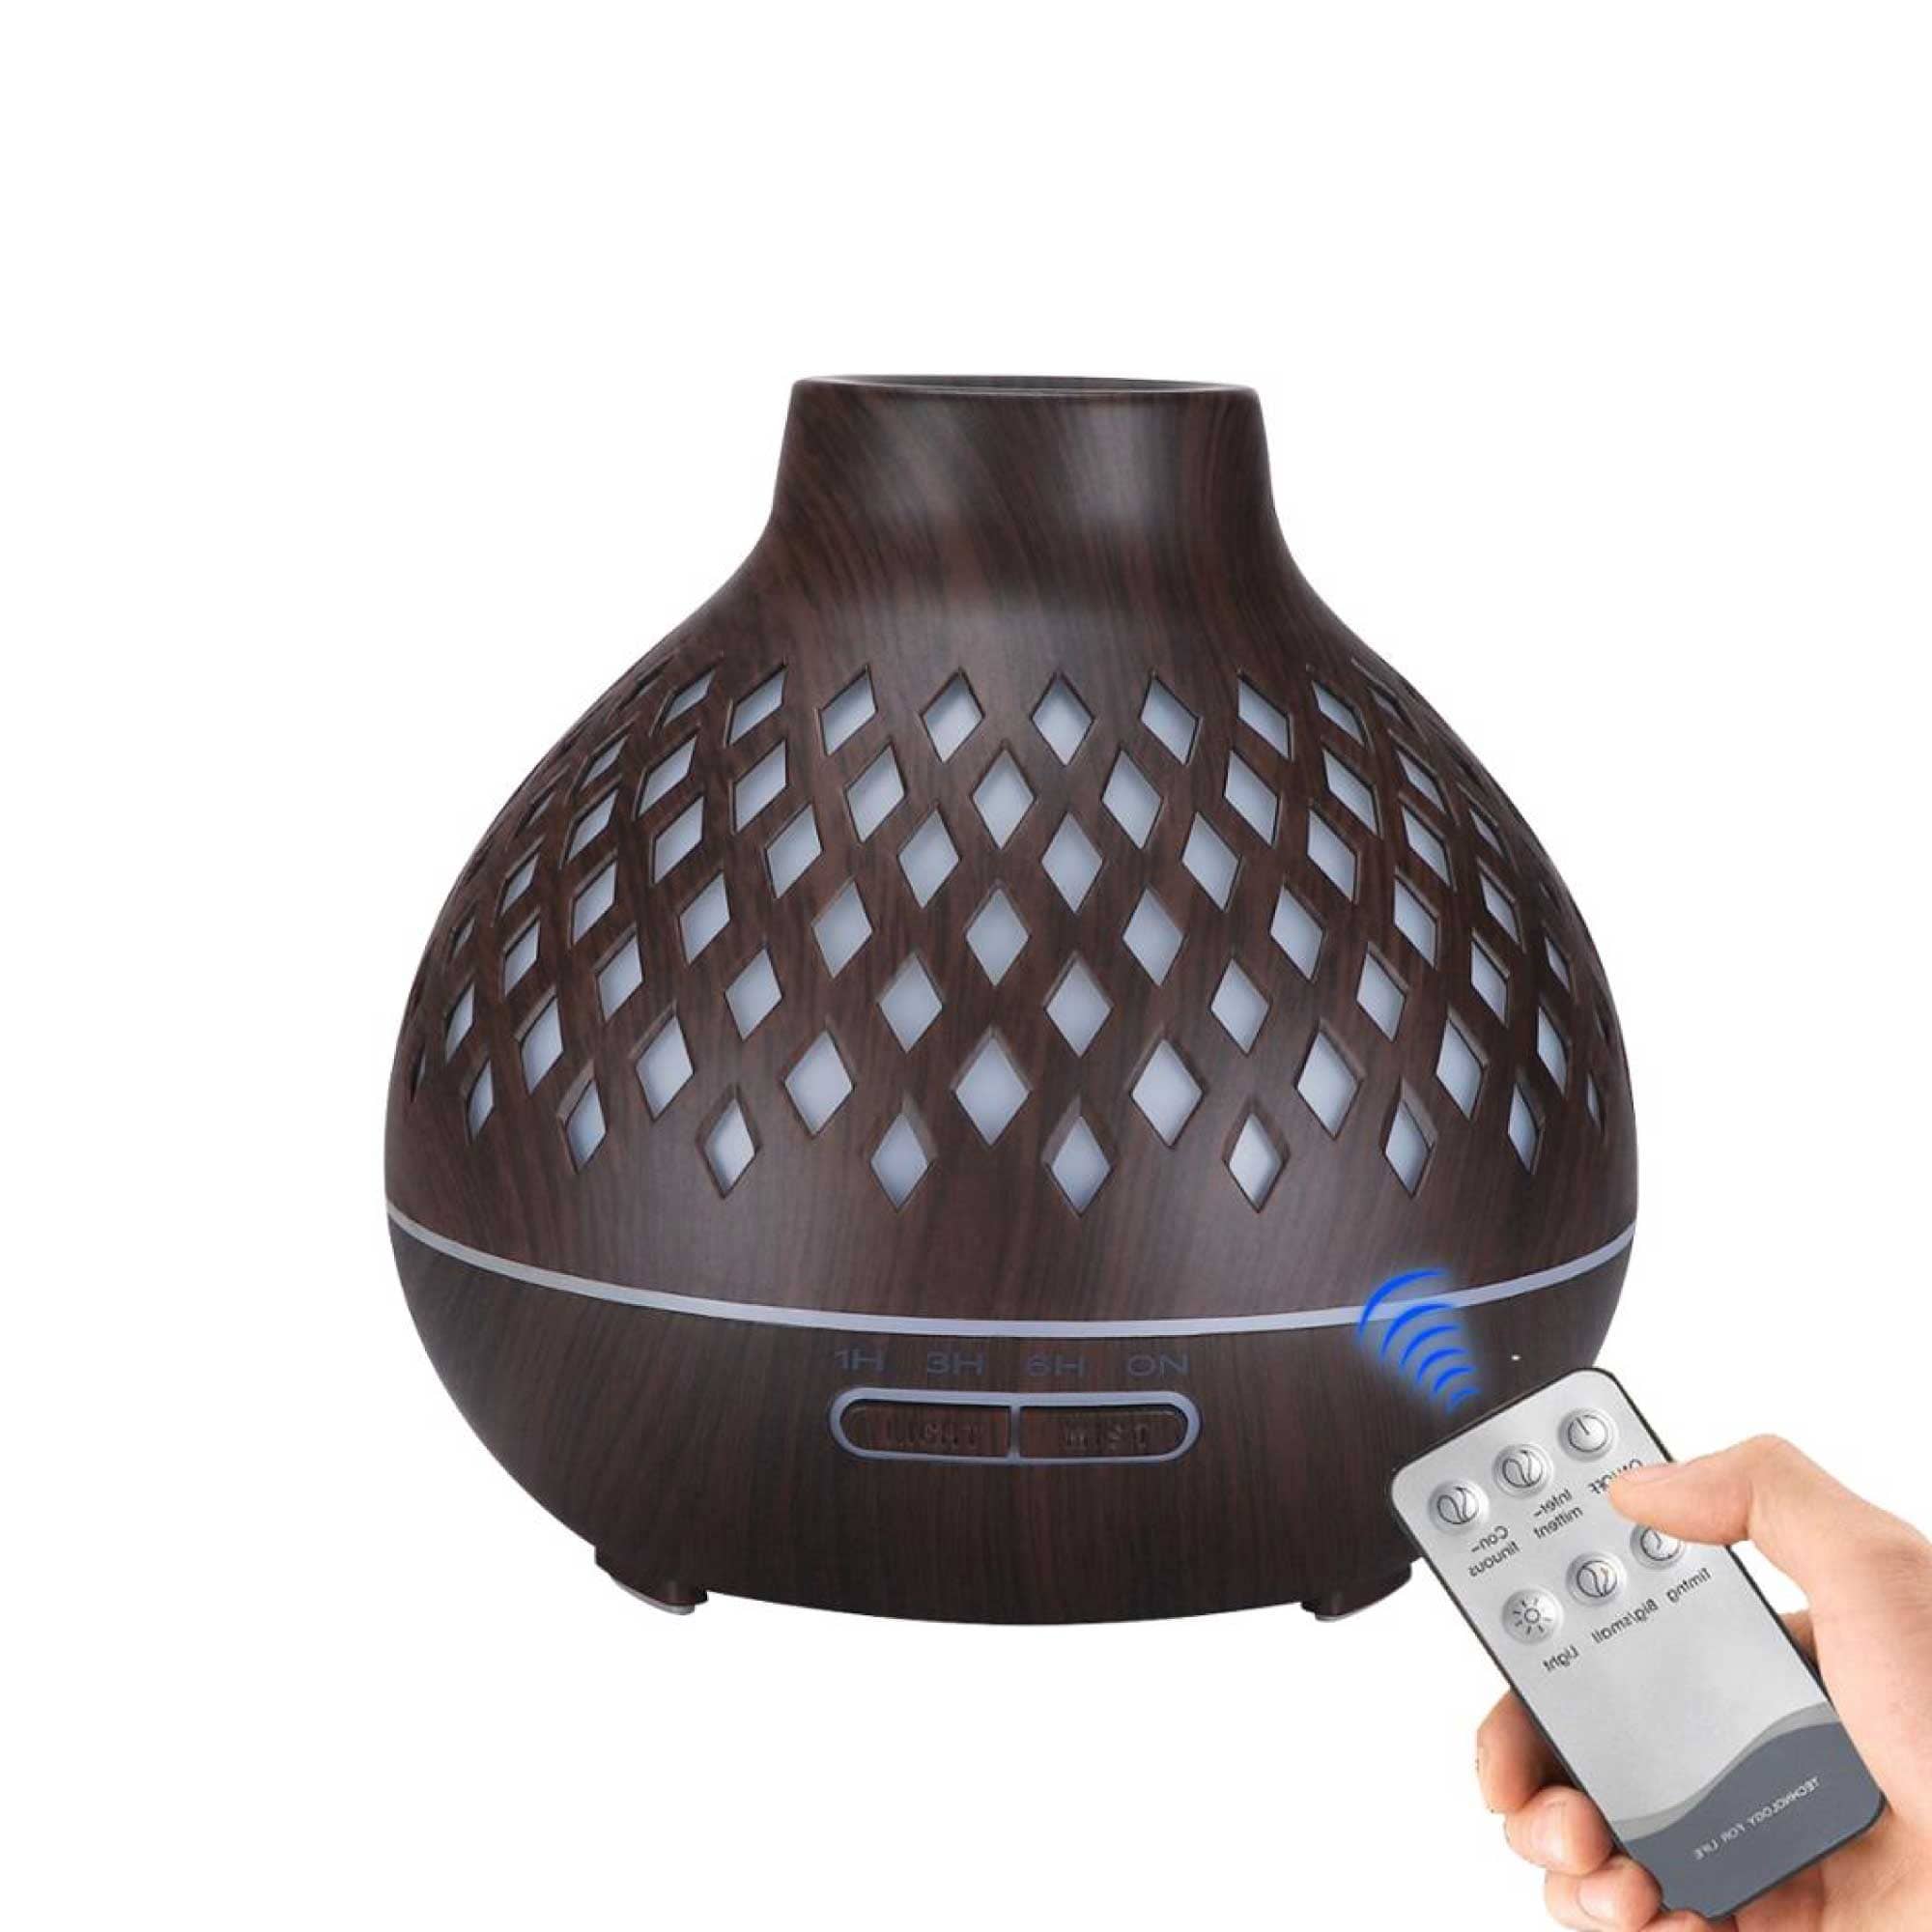 Essential Oil Aroma Diffuser and Remote - 400ml Hollowed Wood Mist Humidifier